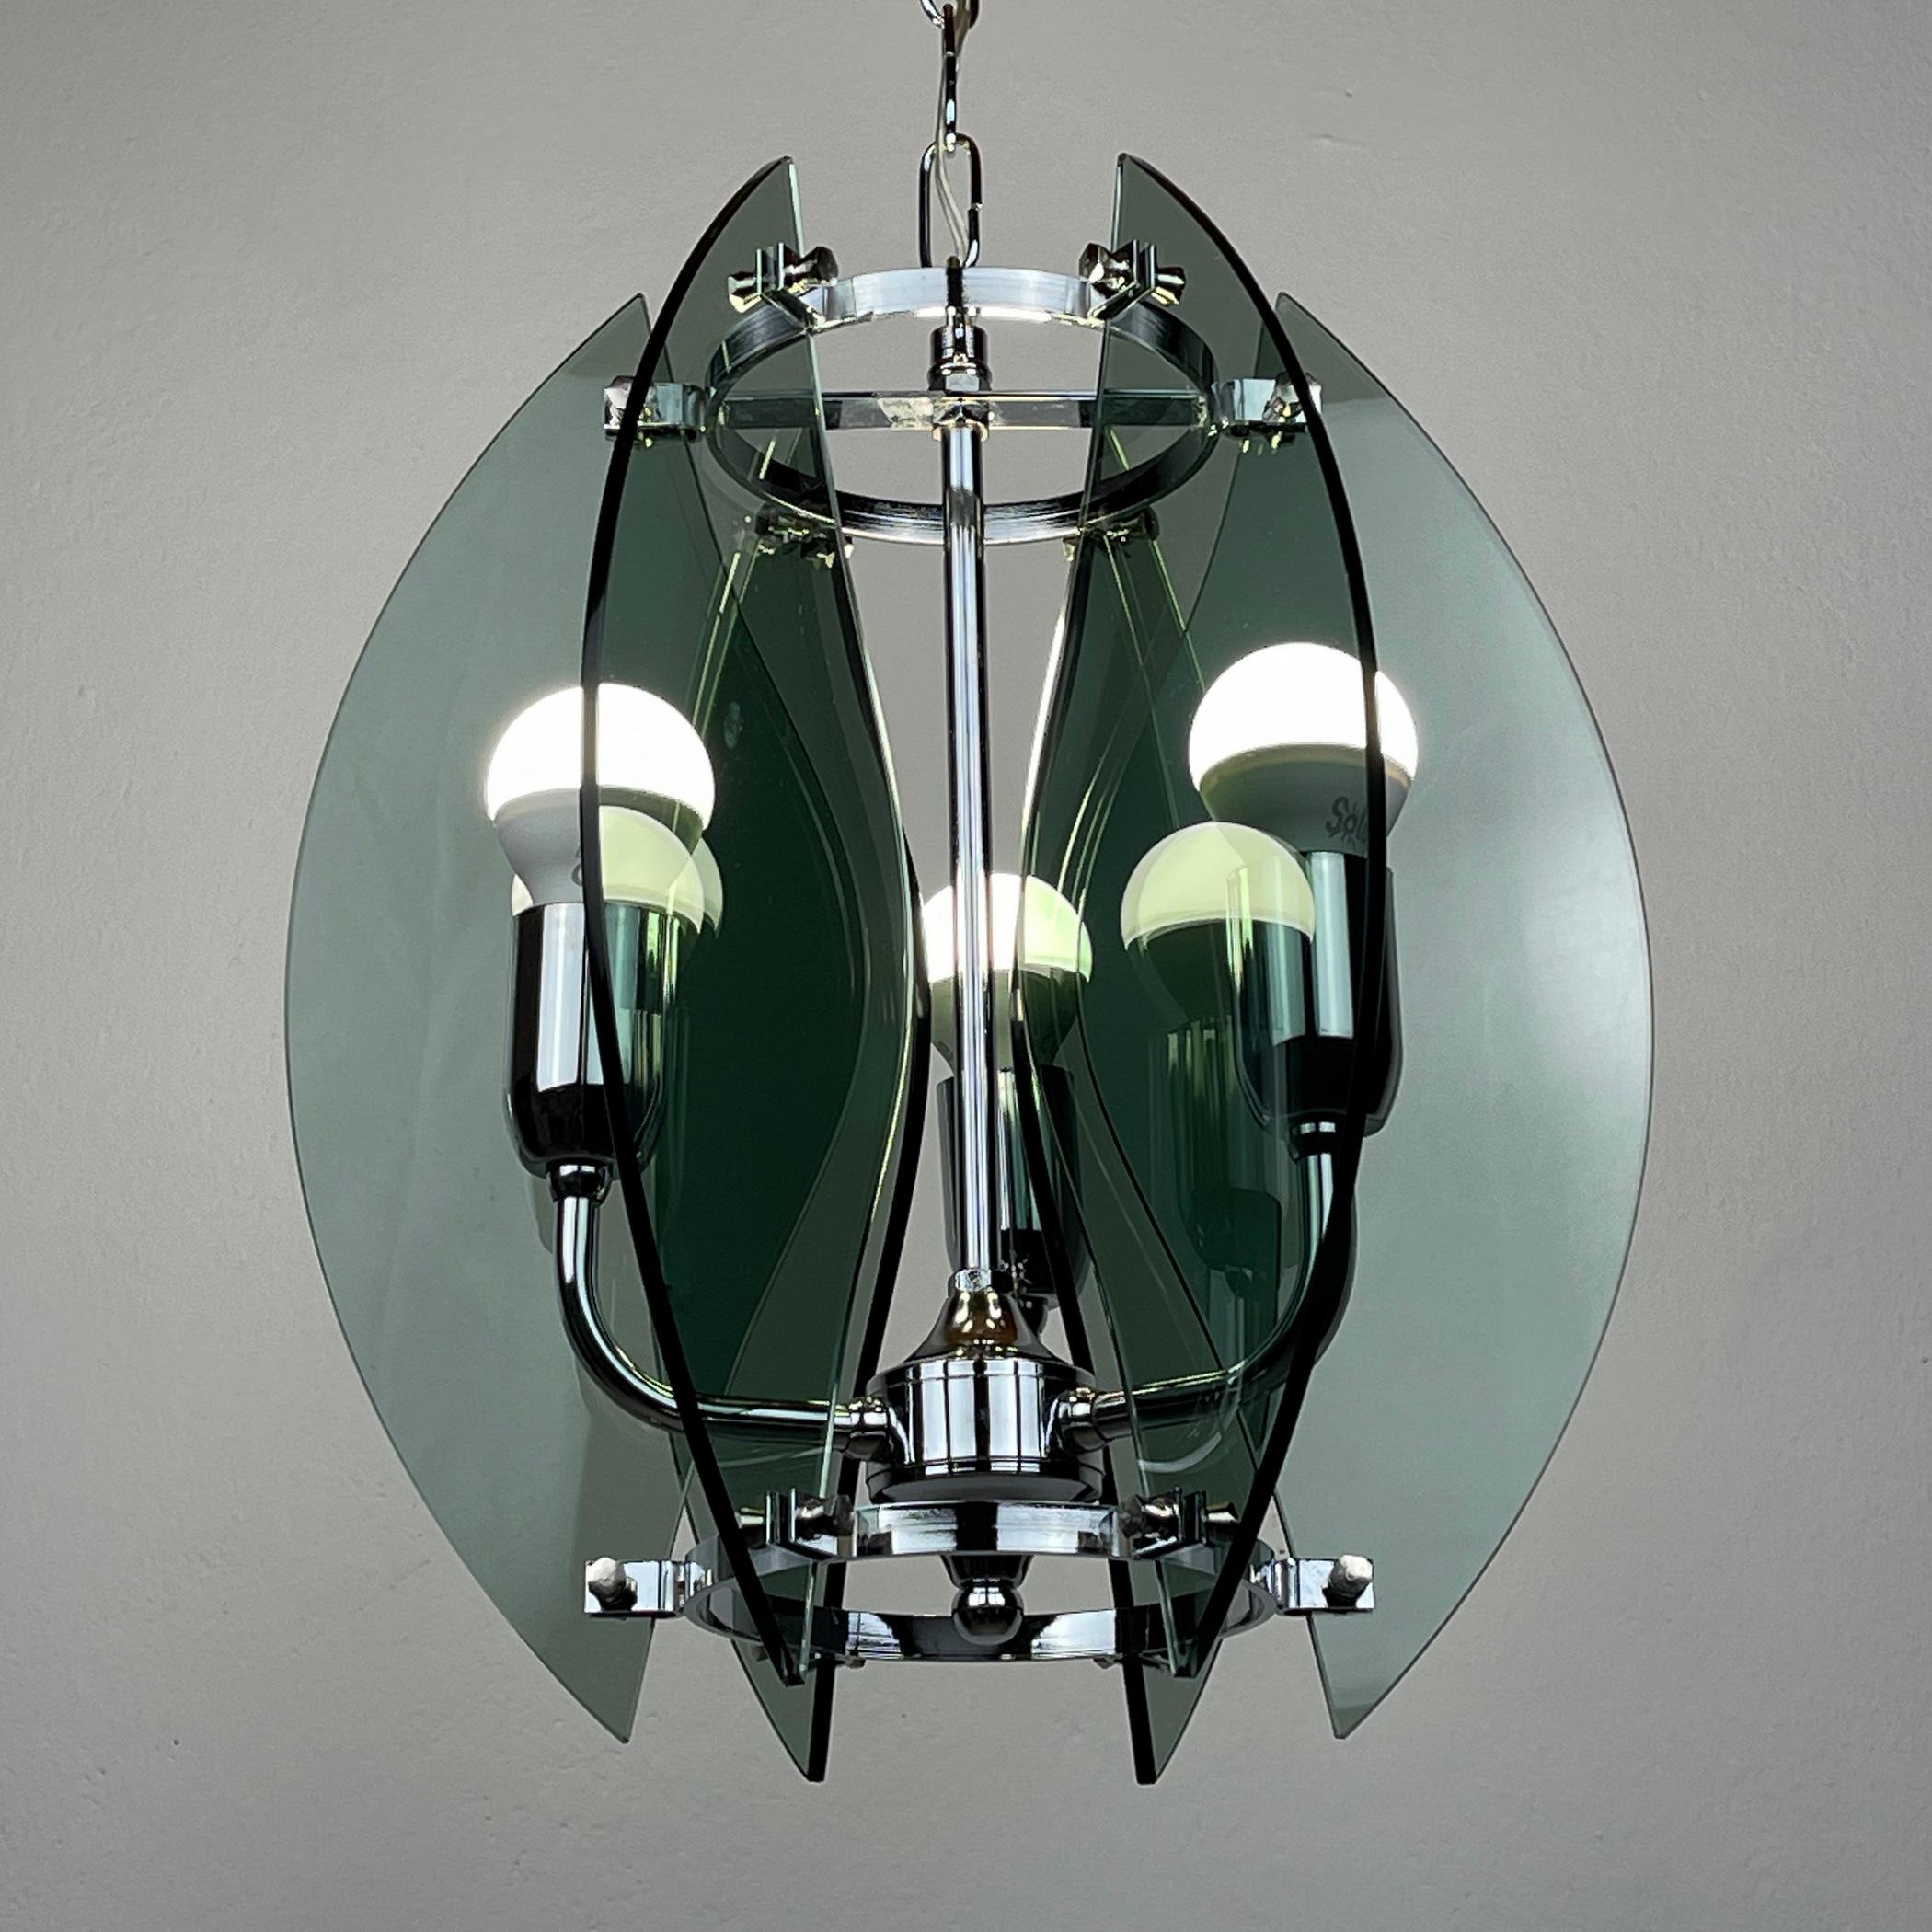 Enhance your space with the timeless charm of this vintage Italian pendant lamp, a true gem from the 1980s. Crafted by Veca, renowned for their exceptional craftsmanship, this 3-lamp chandelier embodies the iconic mid-century modern aesthetic.